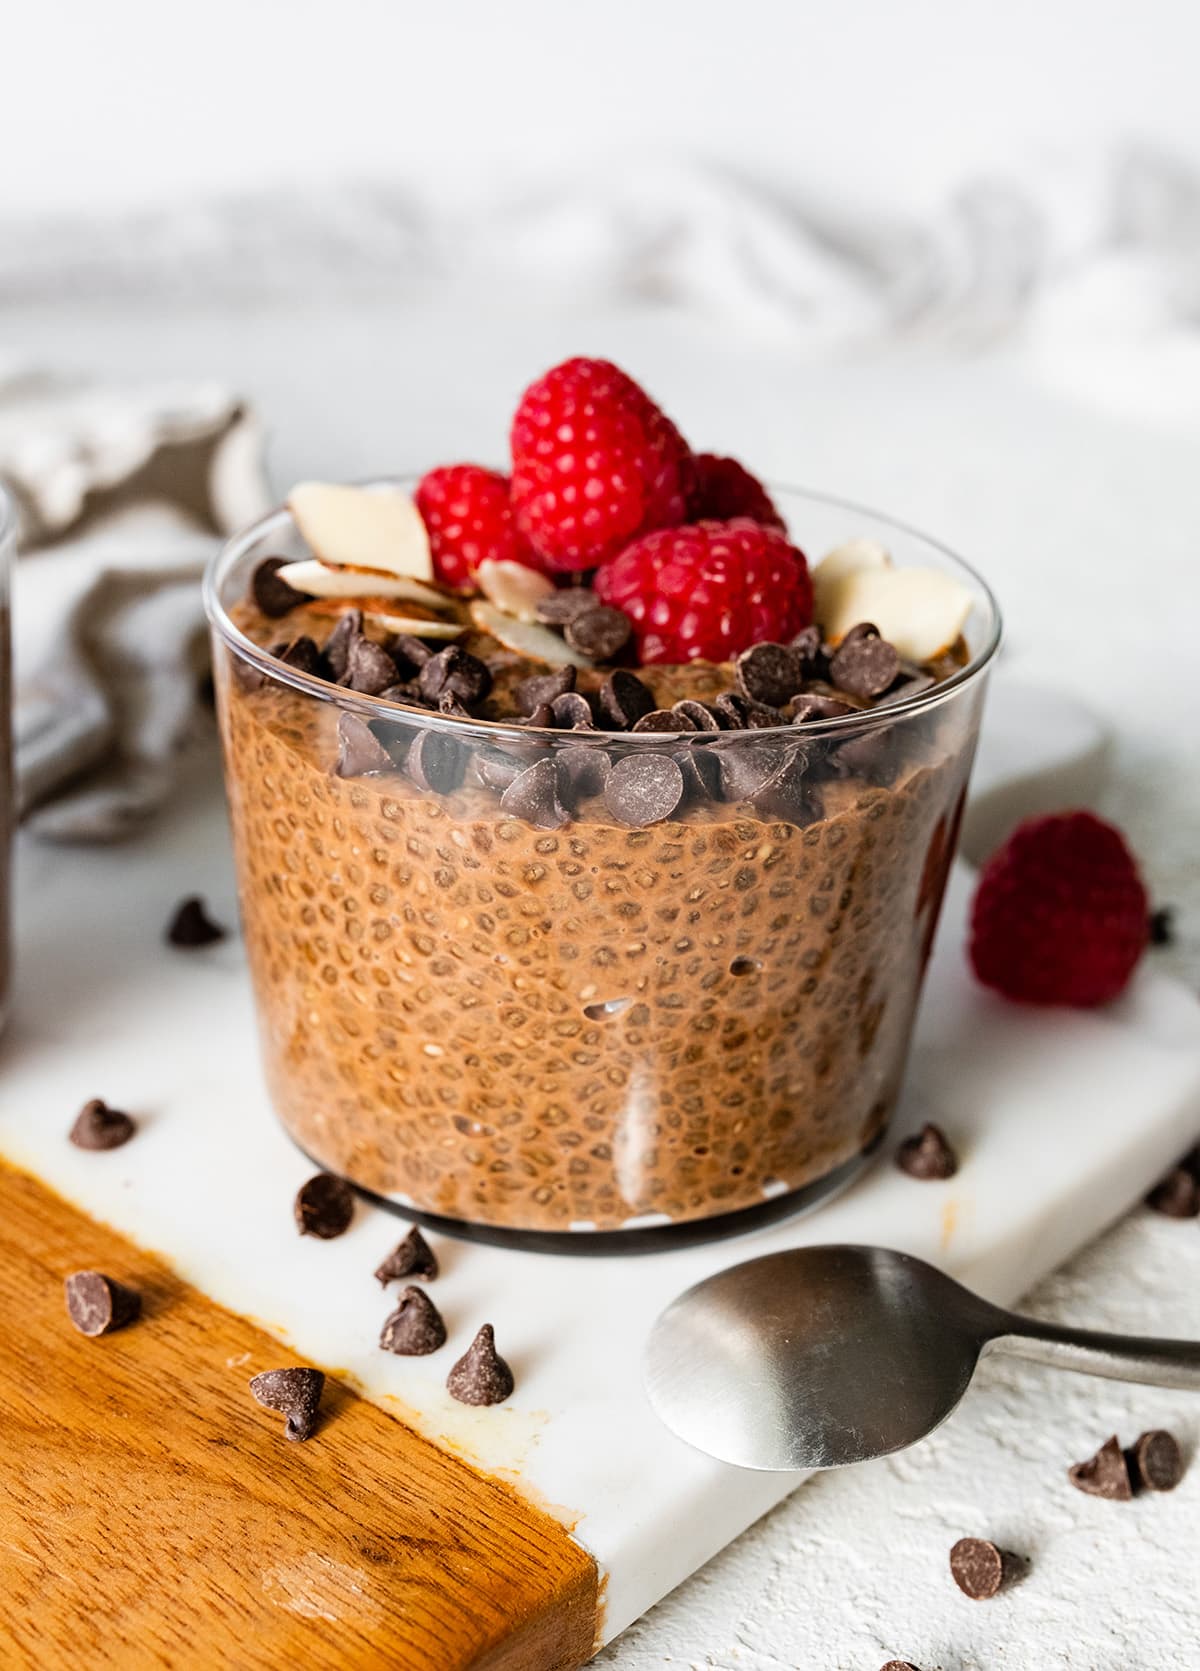 A chocolate chia pudding in a glass cup topped with chocolate chips, sliced almonds, and fresh raspberries.